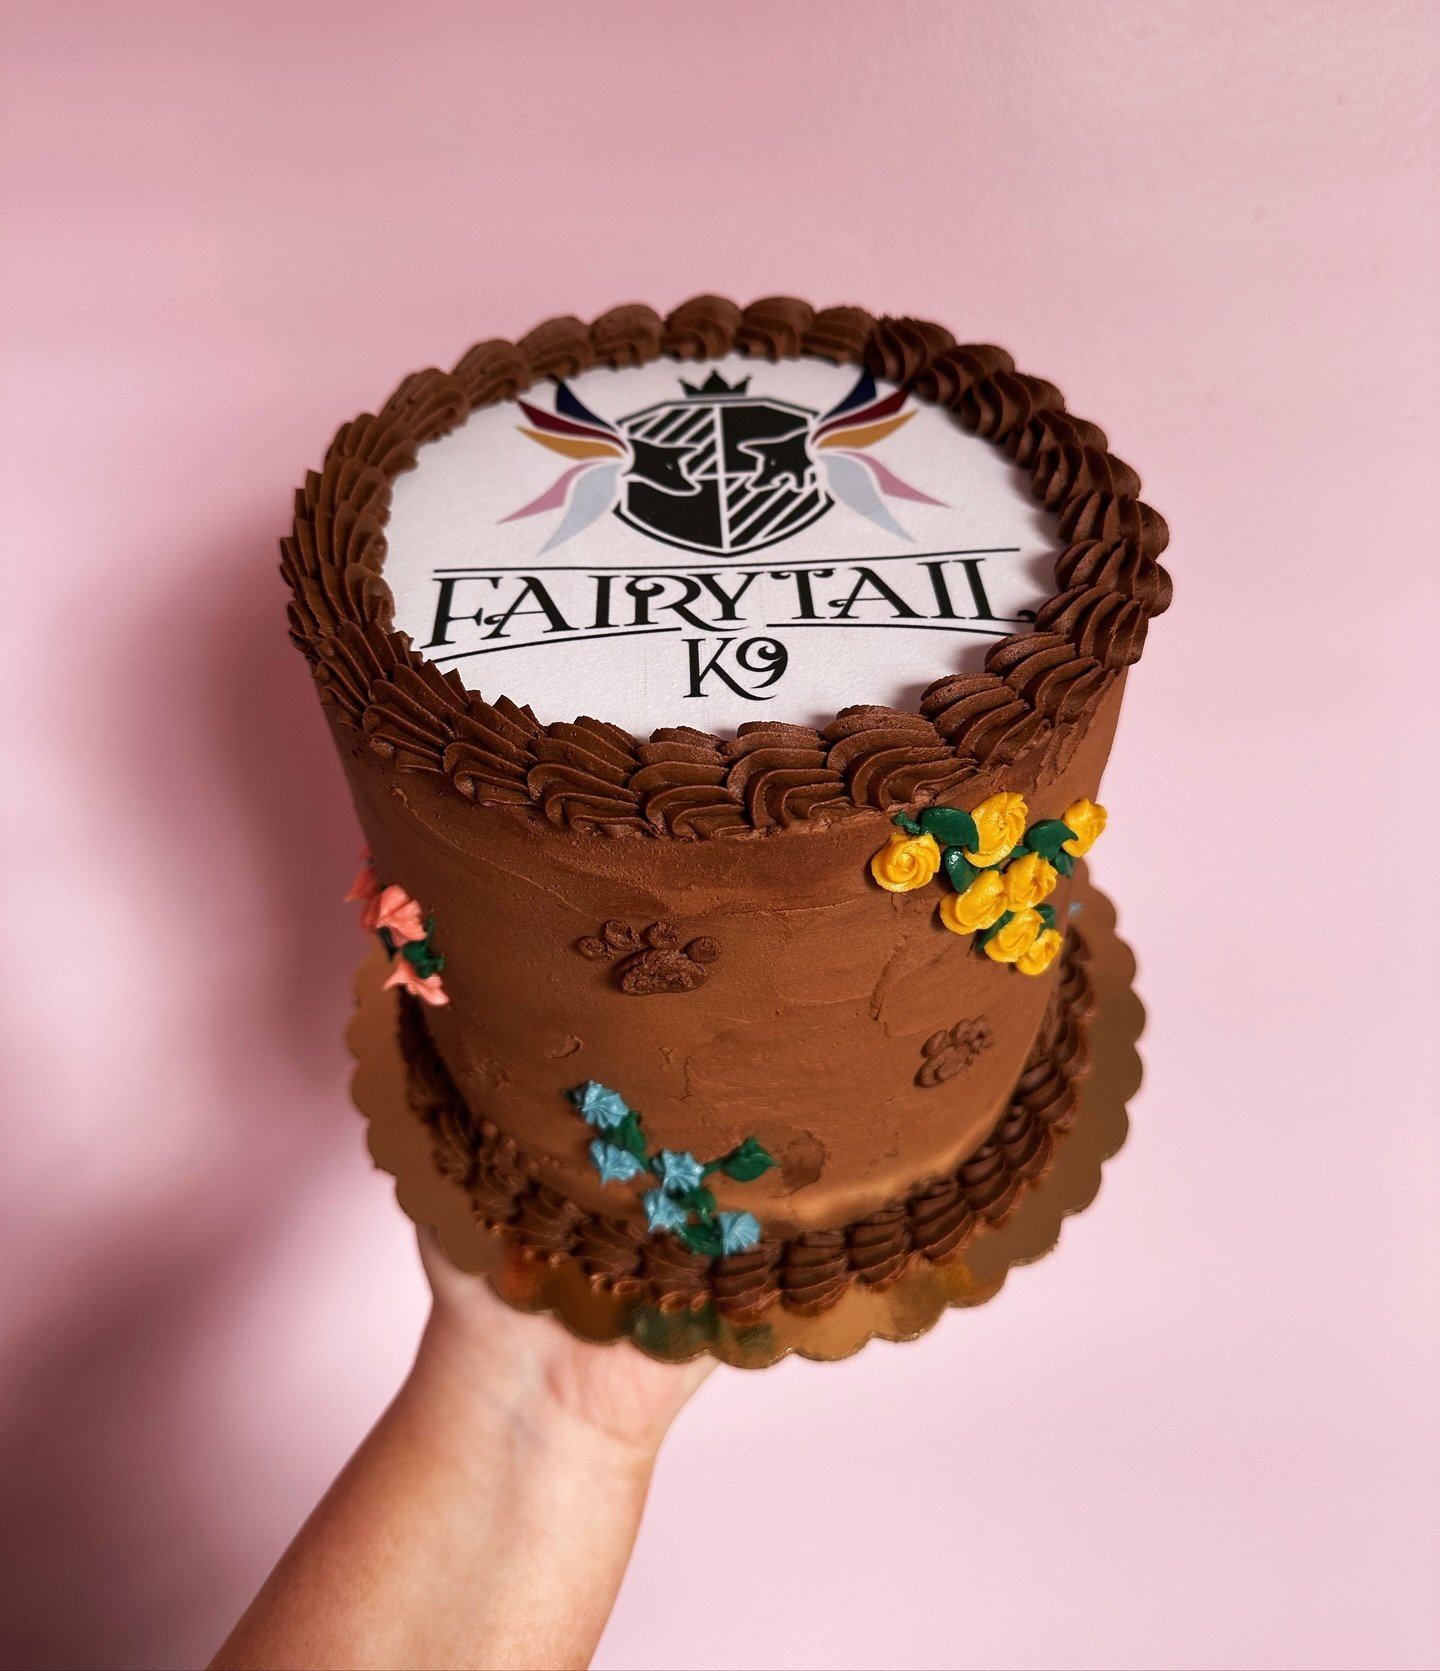 Who says logo cakes can&rsquo;t be adorable 🥰🩷
&bull;
Congrats on your new space @fairytailk9! 
&bull;
&bull;
&bull;
&bull;
&bull;
#cake #cakeoftheday #cakes #cakedecorating #cakestyle #cakeart #logocake #cakedecorator #cakesofinstagram #nashville 